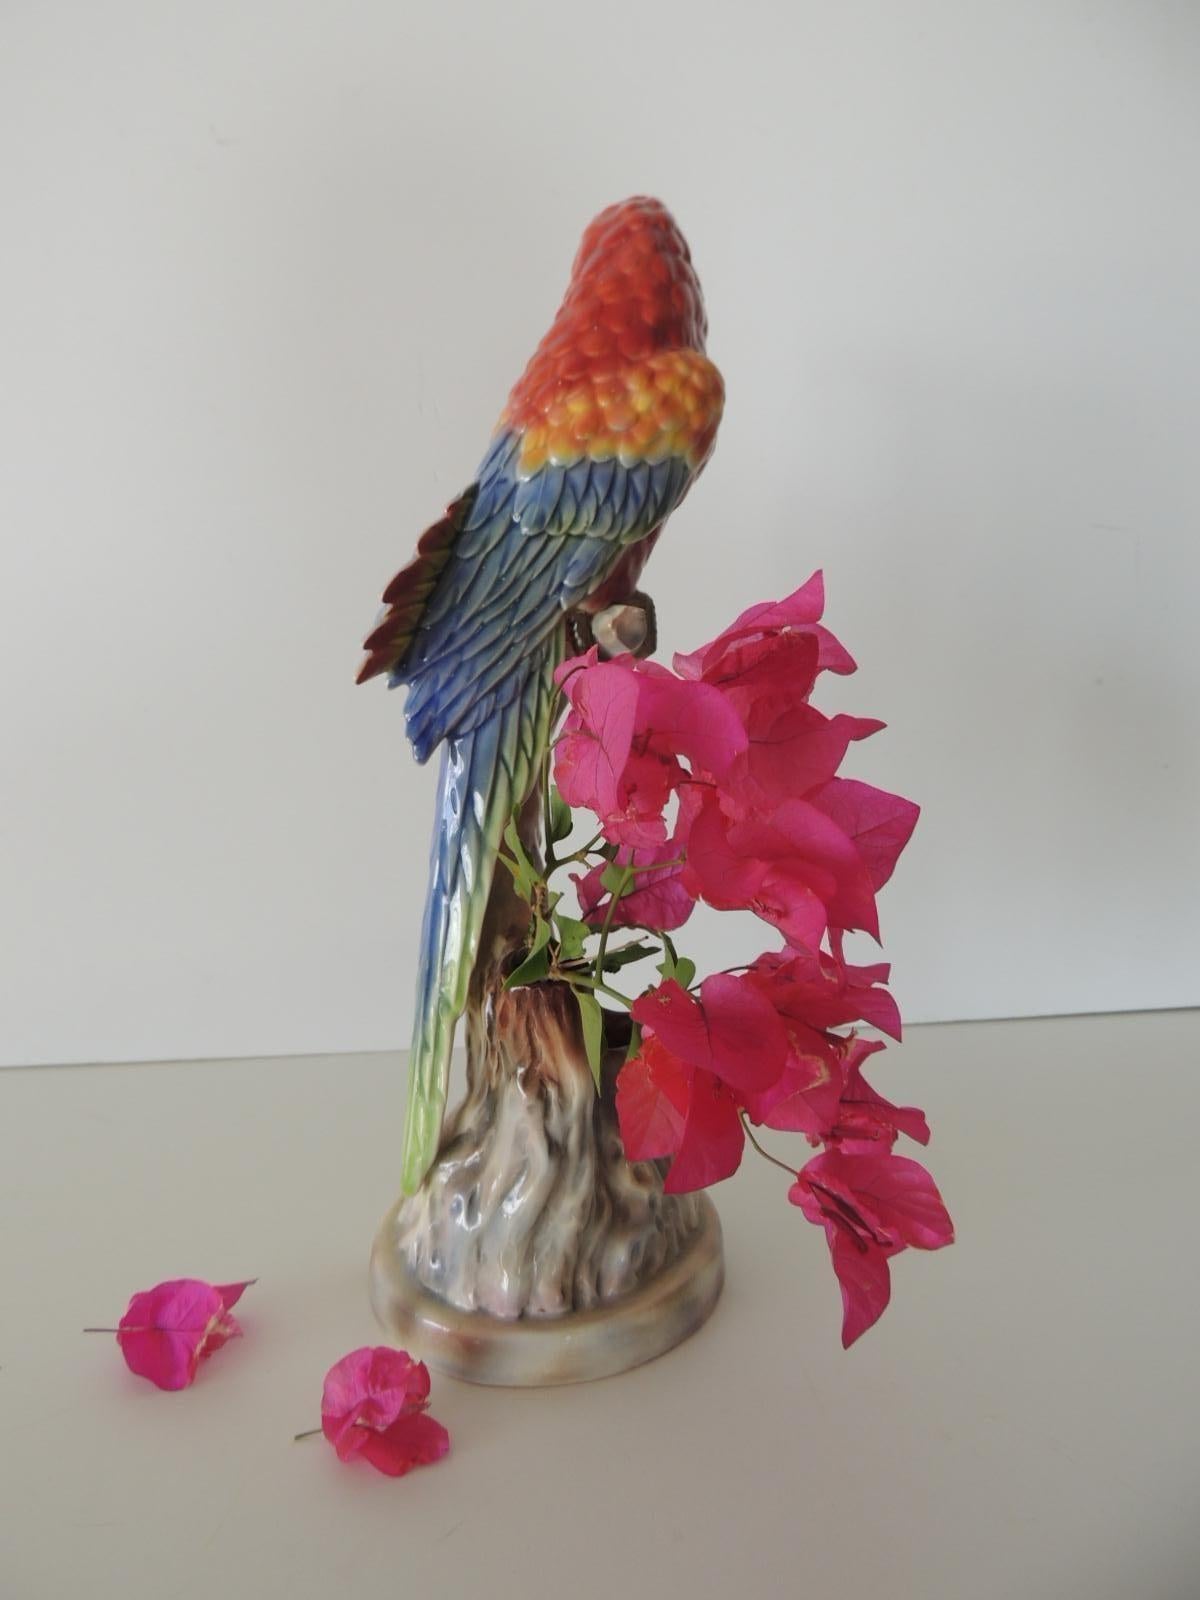 Mid-20th Century Will George California Porcelain Art Pottery Macaw Parrot Figurine Vase, 1940's